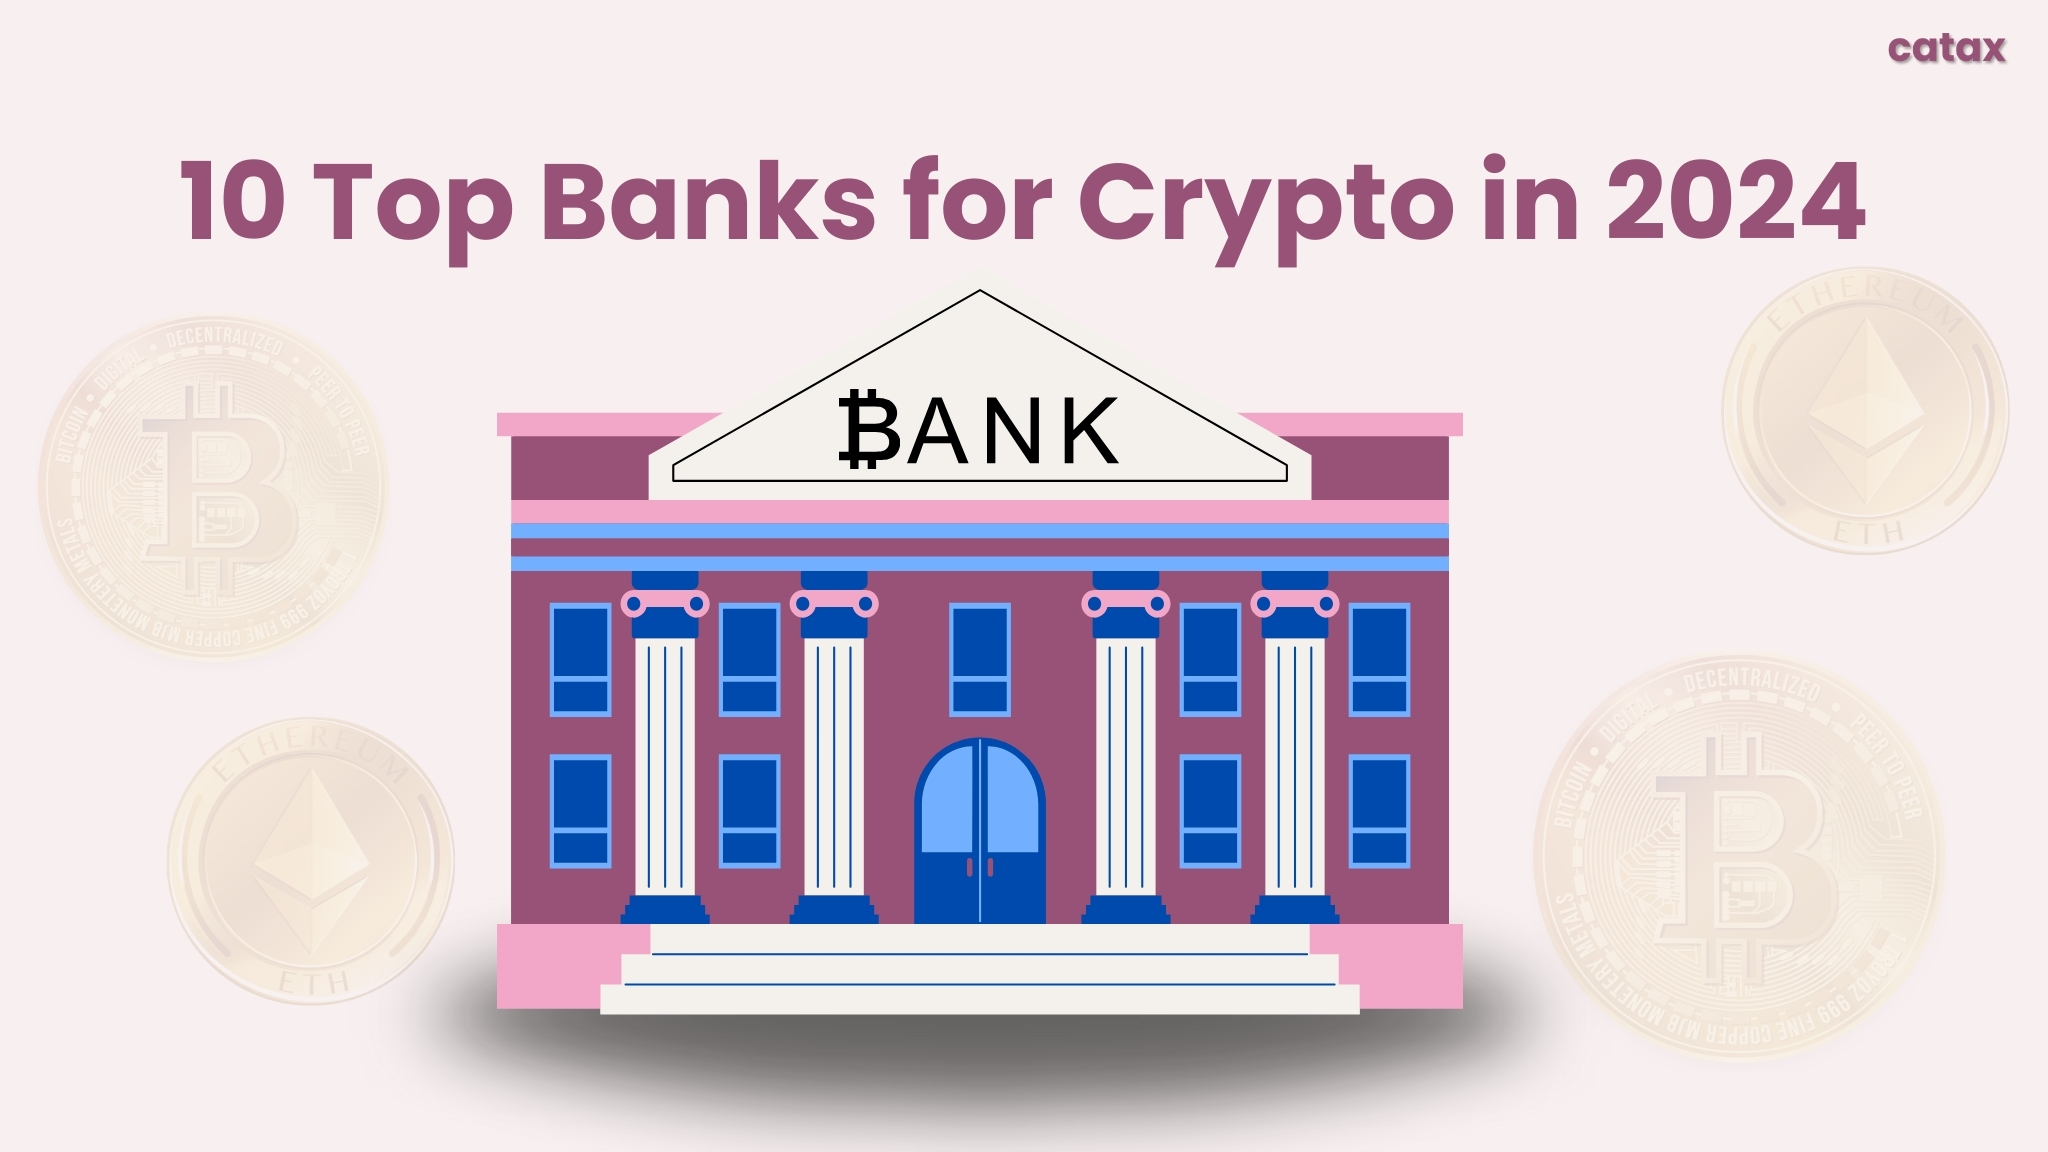 10 Top Banks for Crypto in 2024